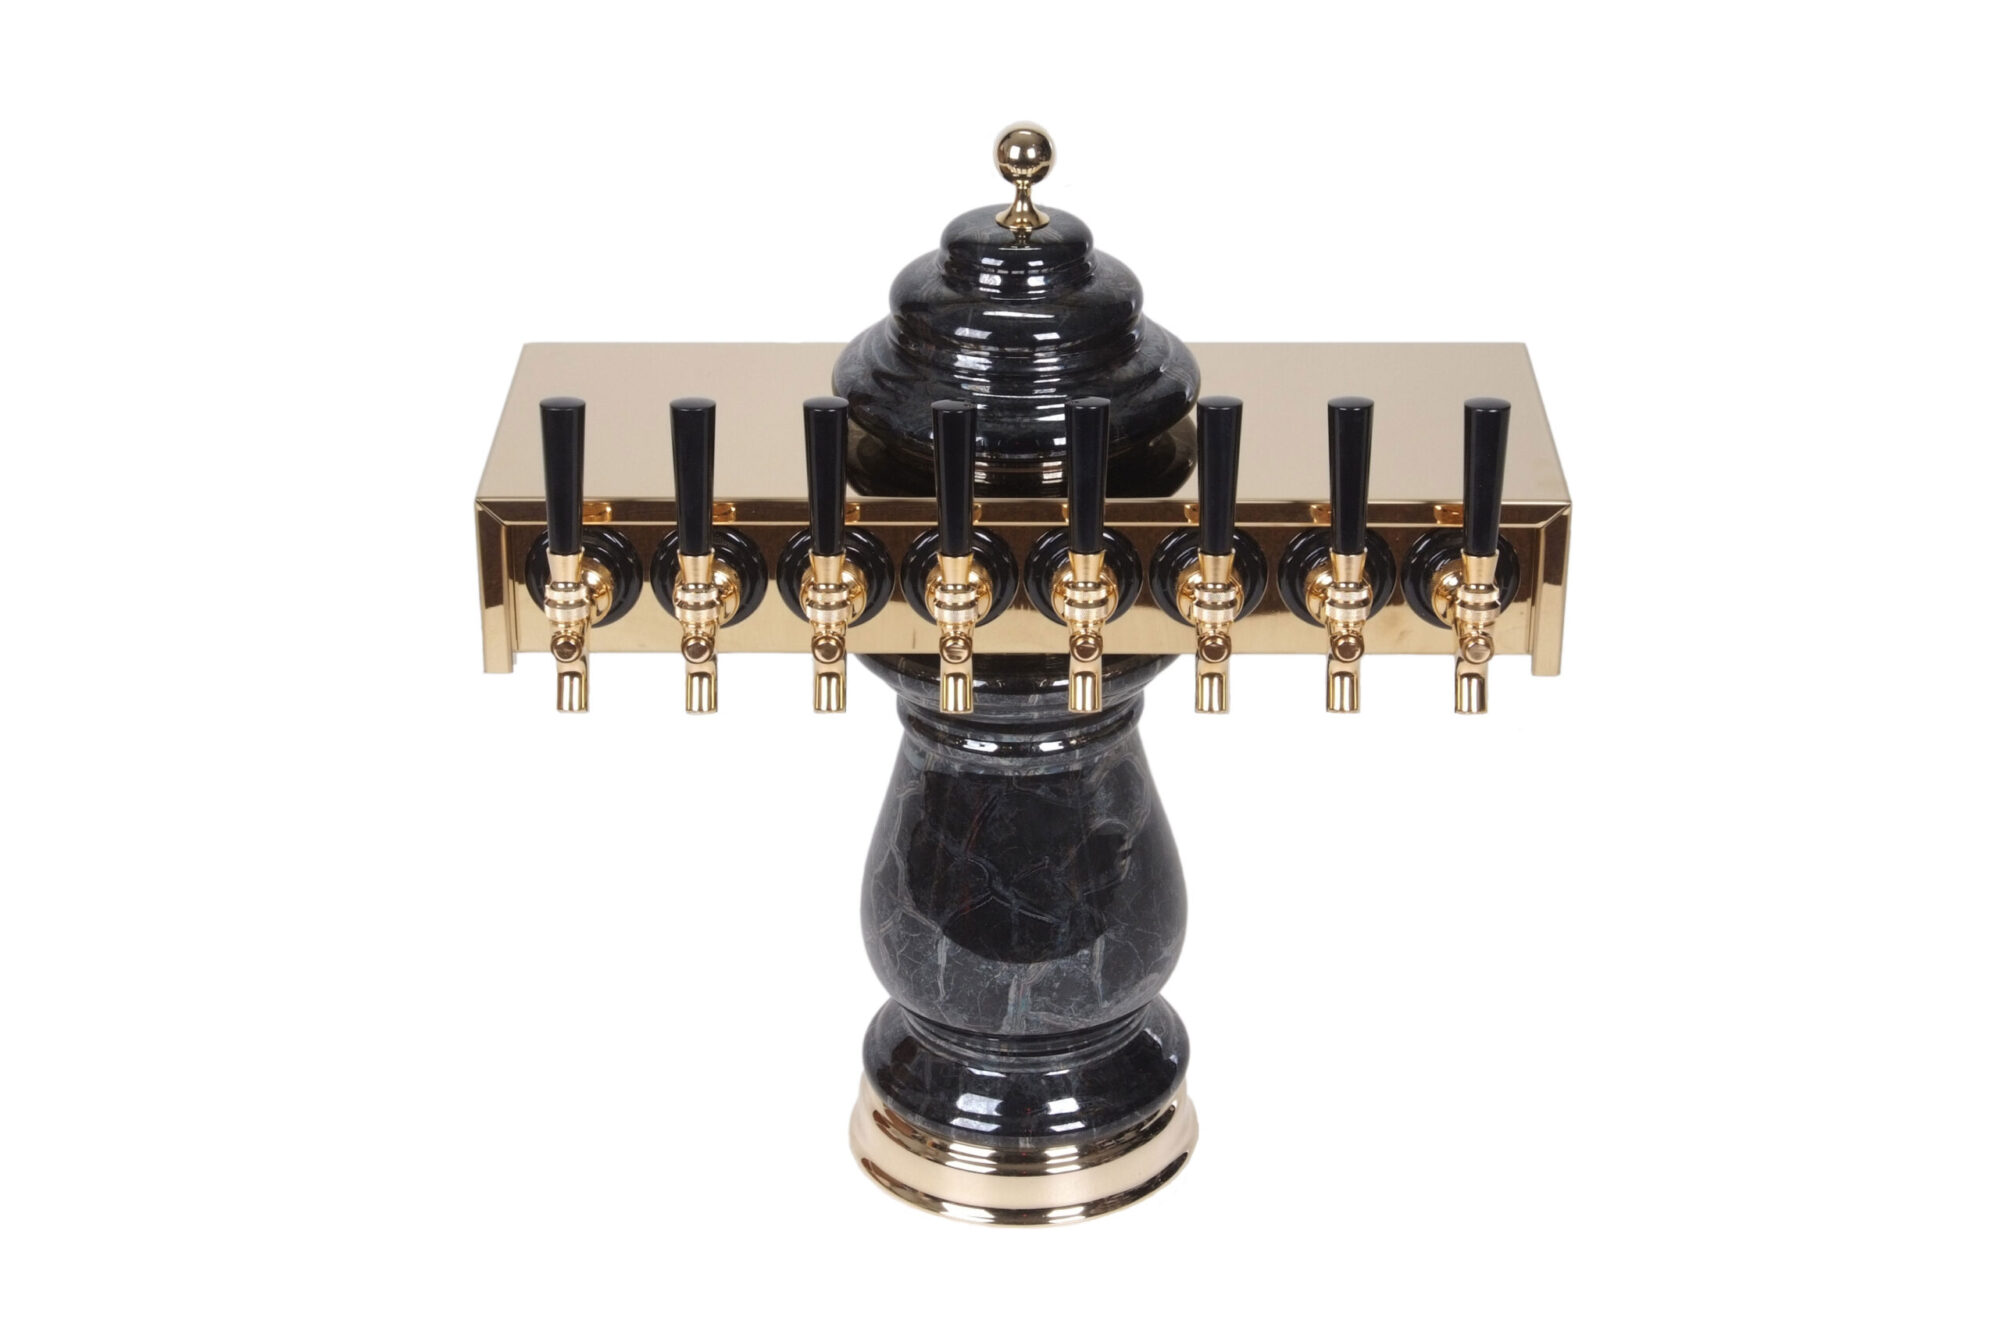 887BG-8 -- Eight Faucet Ceramic T-Tower with PVD Brass Top and Faucets - Glycol Ready - Shown in Black Marble